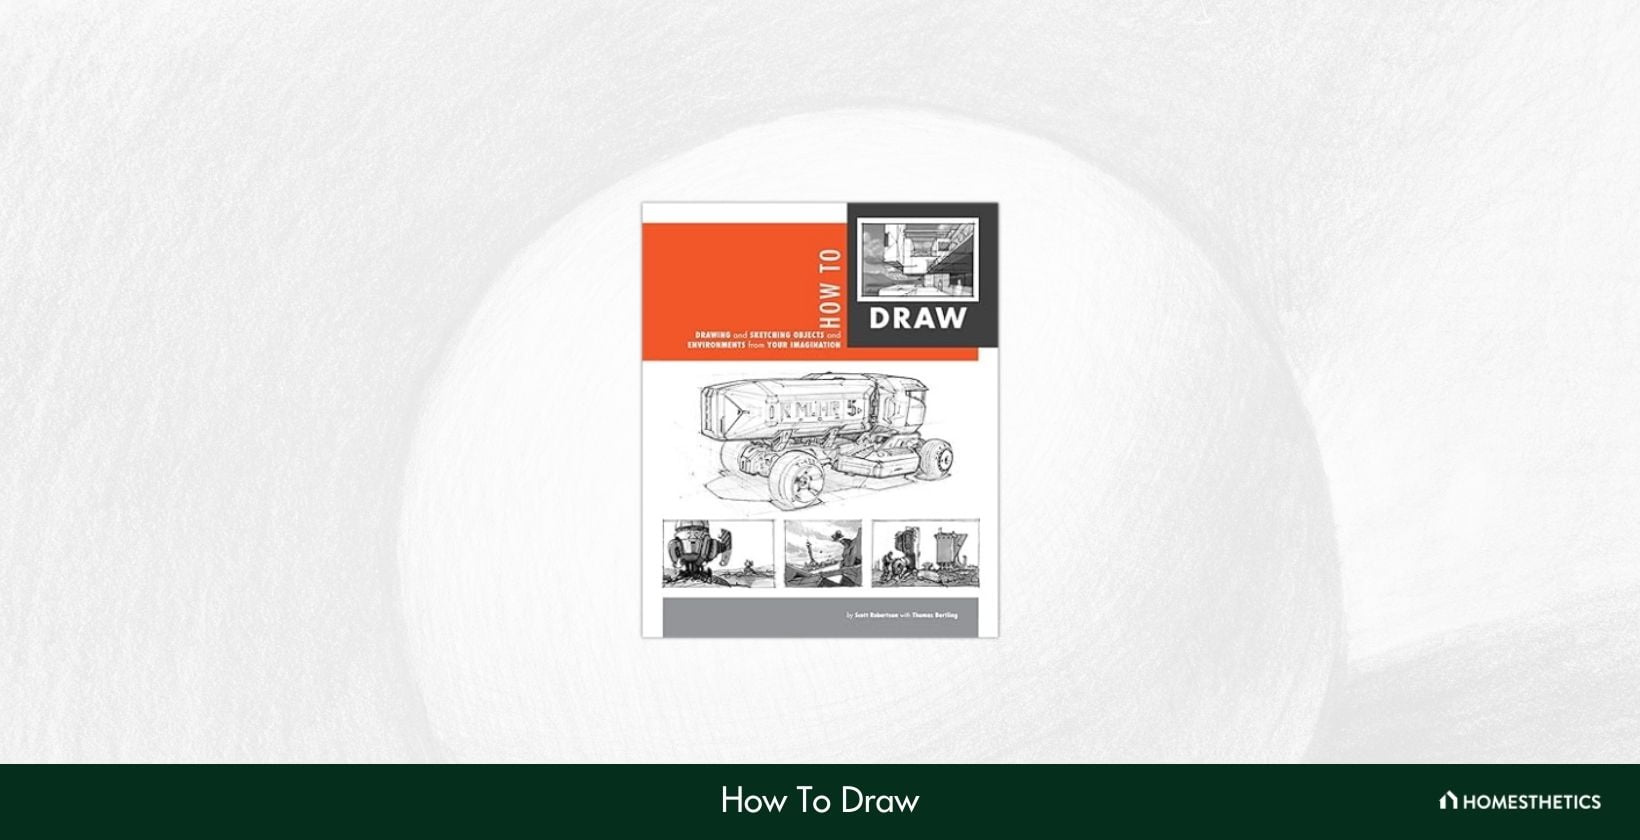 How To Draw by Scott Robertson and Thomas Bertling